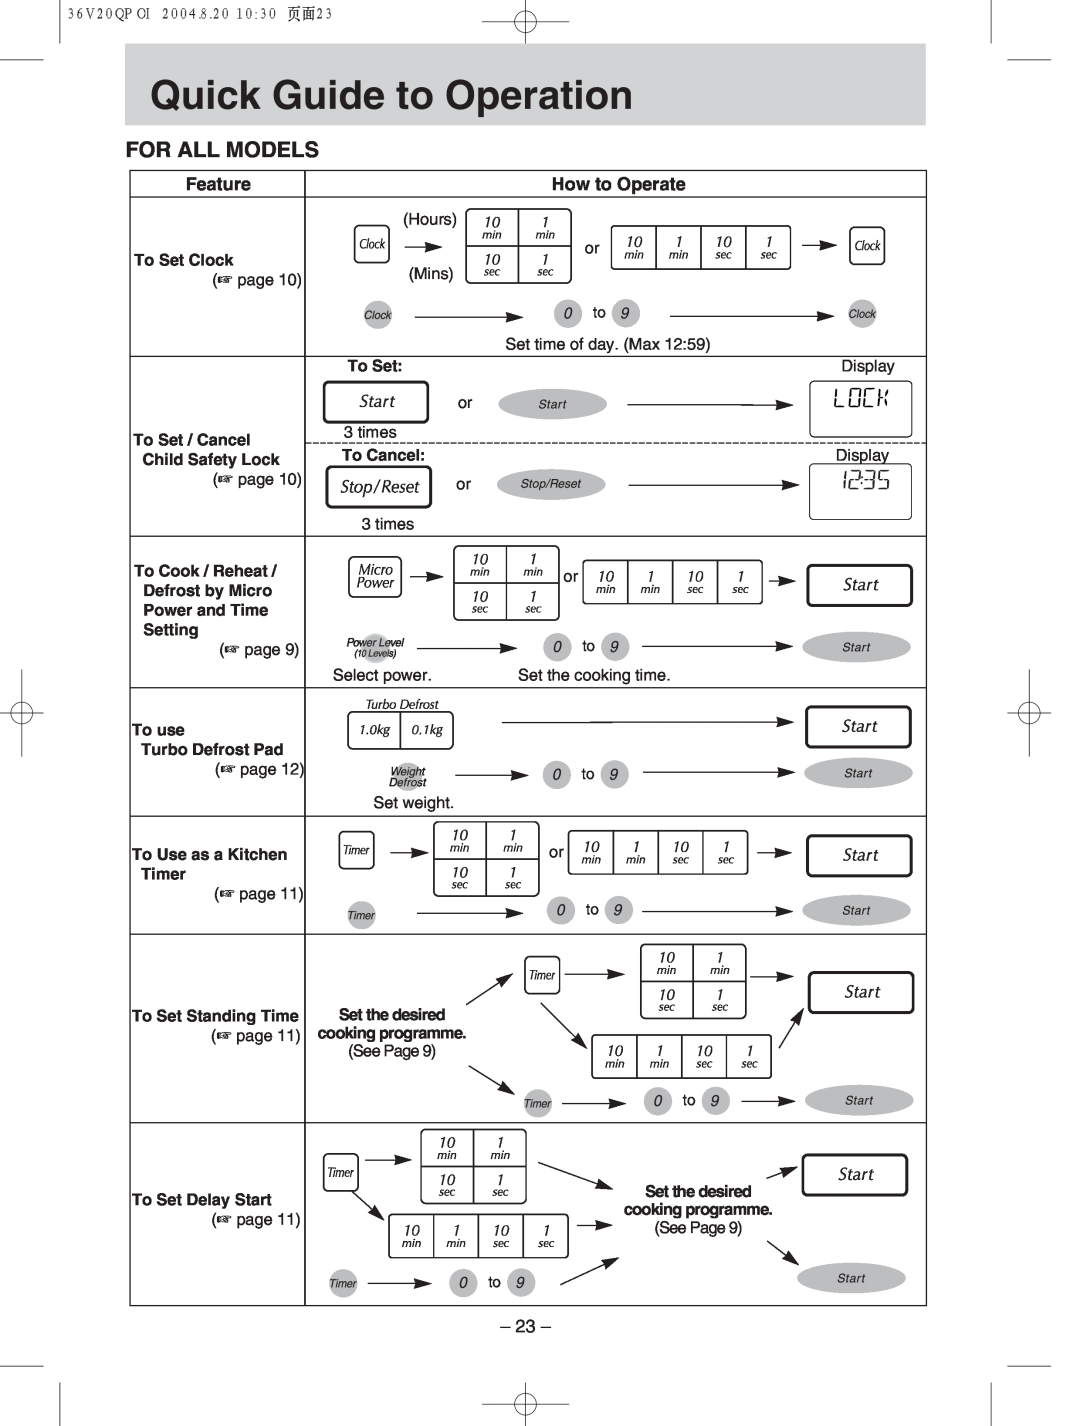 Panasonic NN-S784, NN-T704 manual h Quick Guide to Operation, For All Models, Feature, How to Operate 